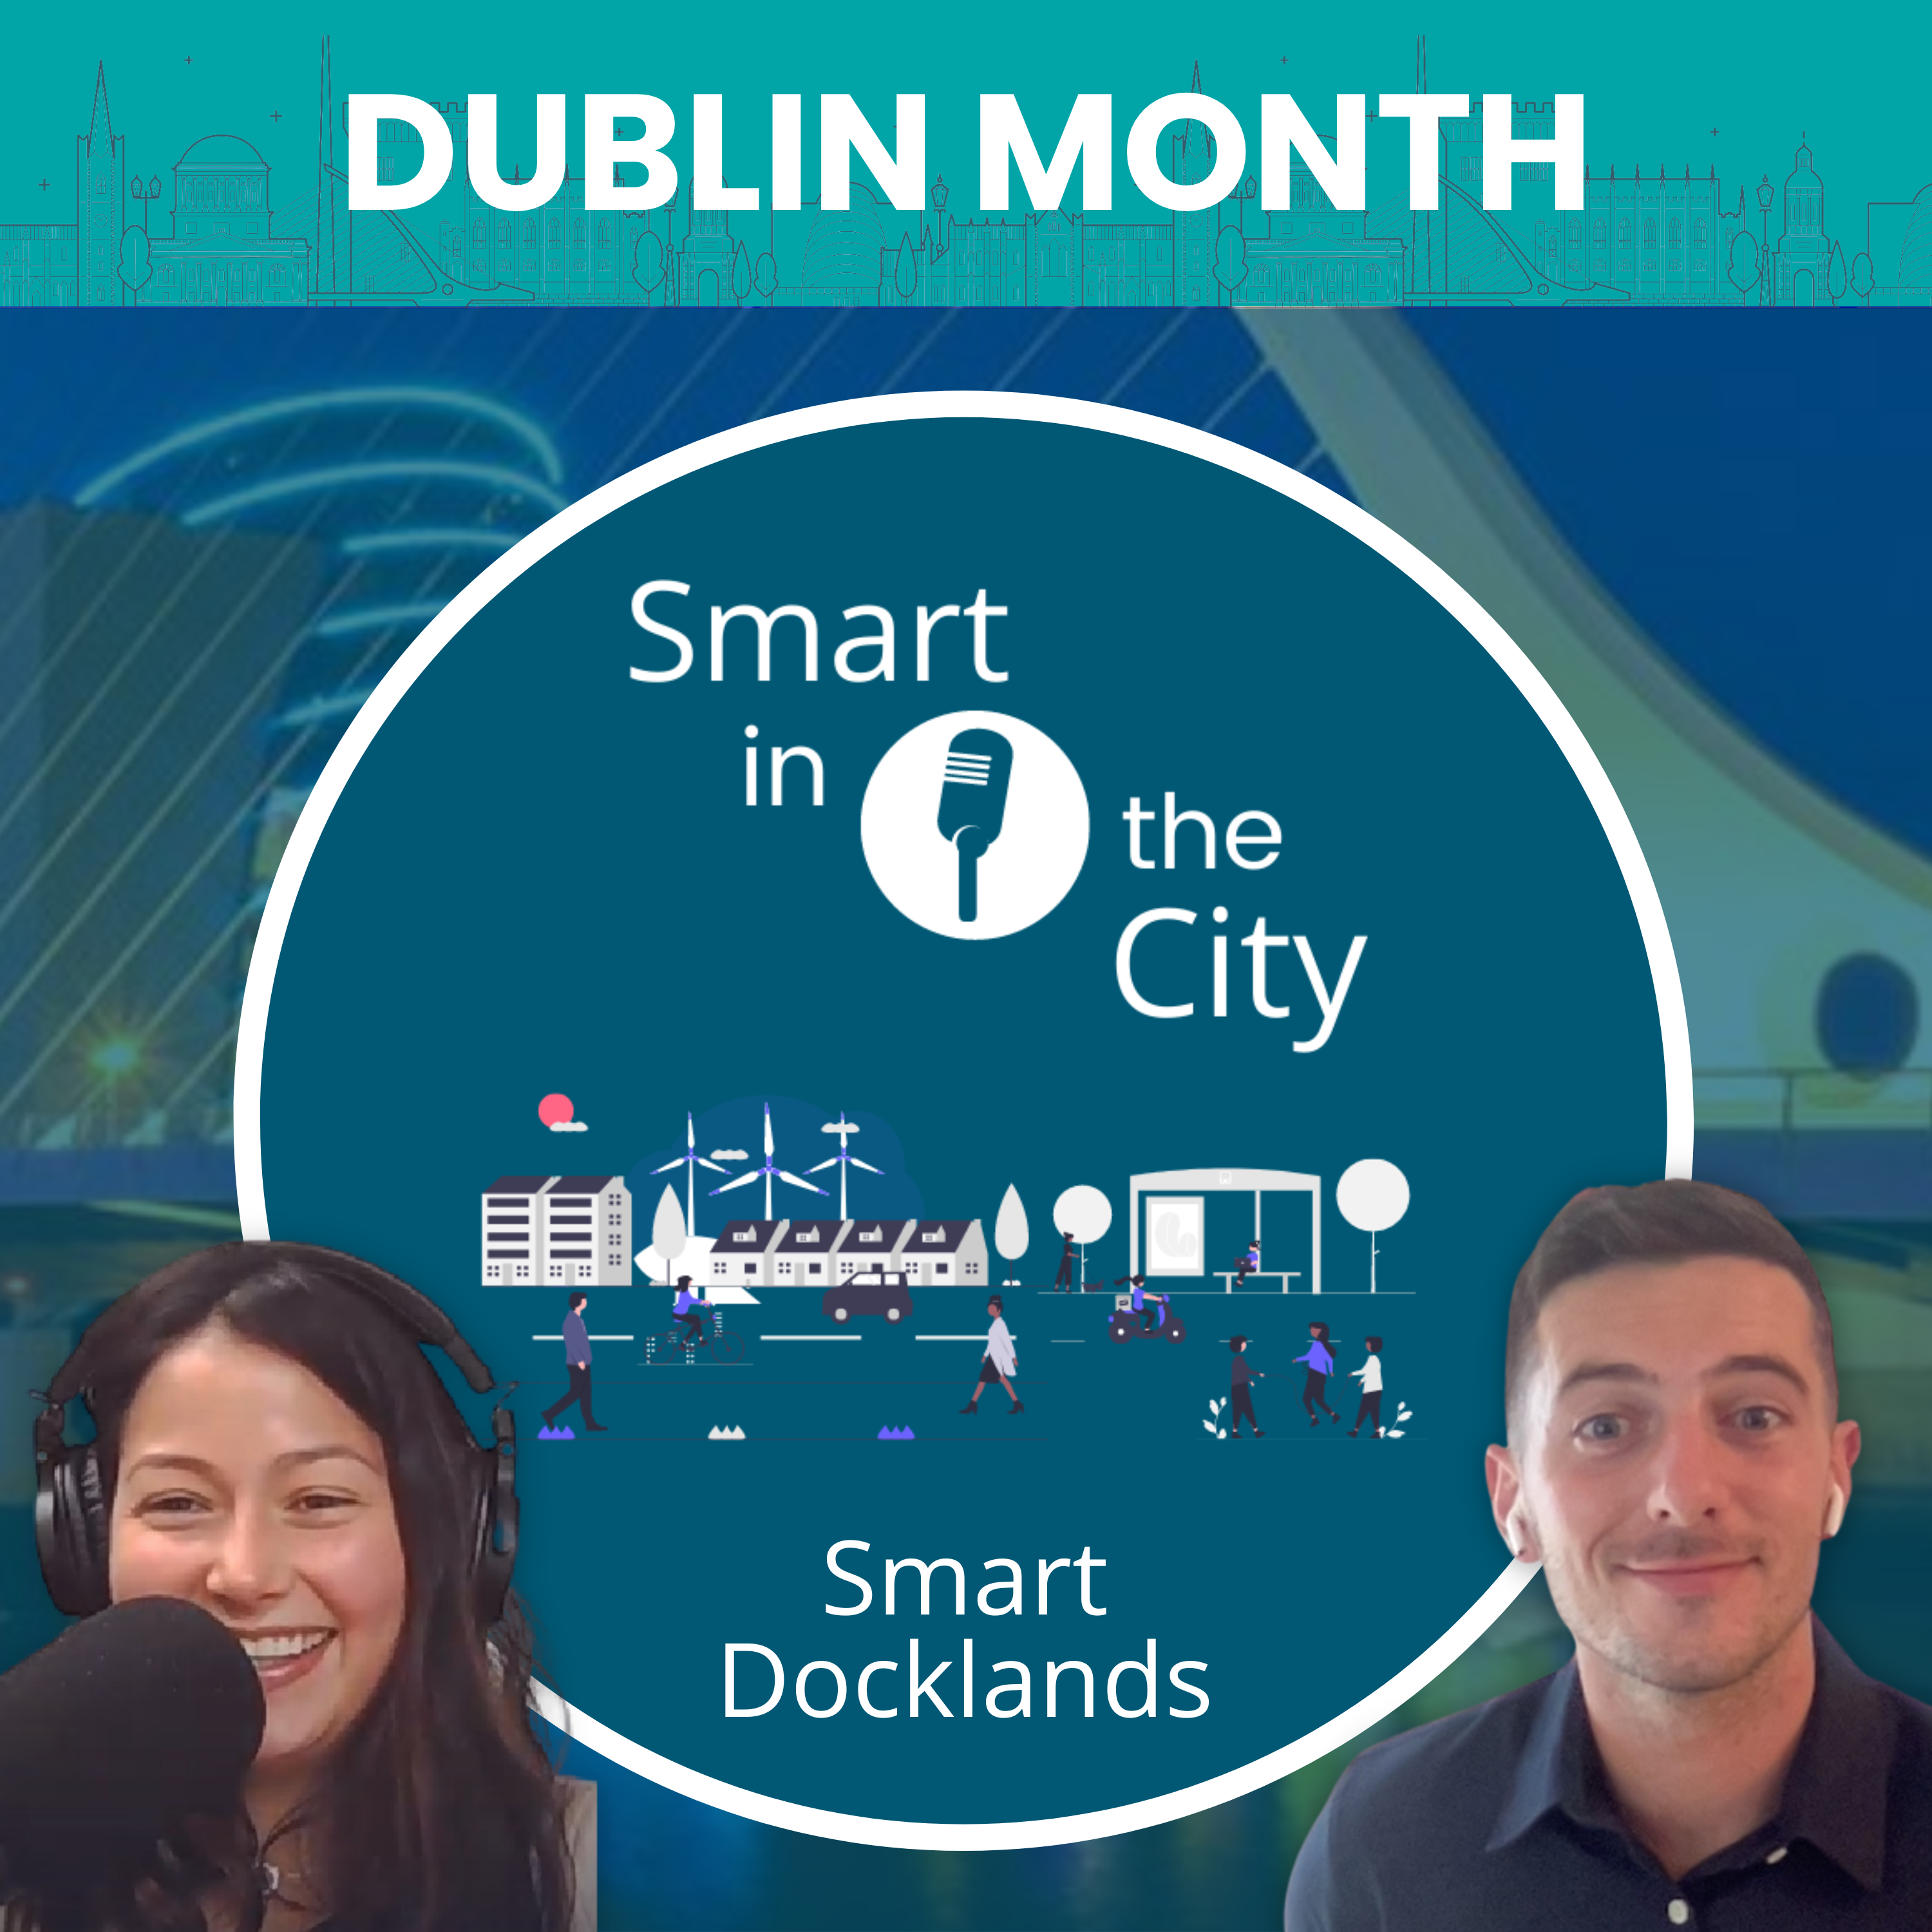 Dublin Month #5 - Smart Docklands: "Education, Engagement and Connectivity"